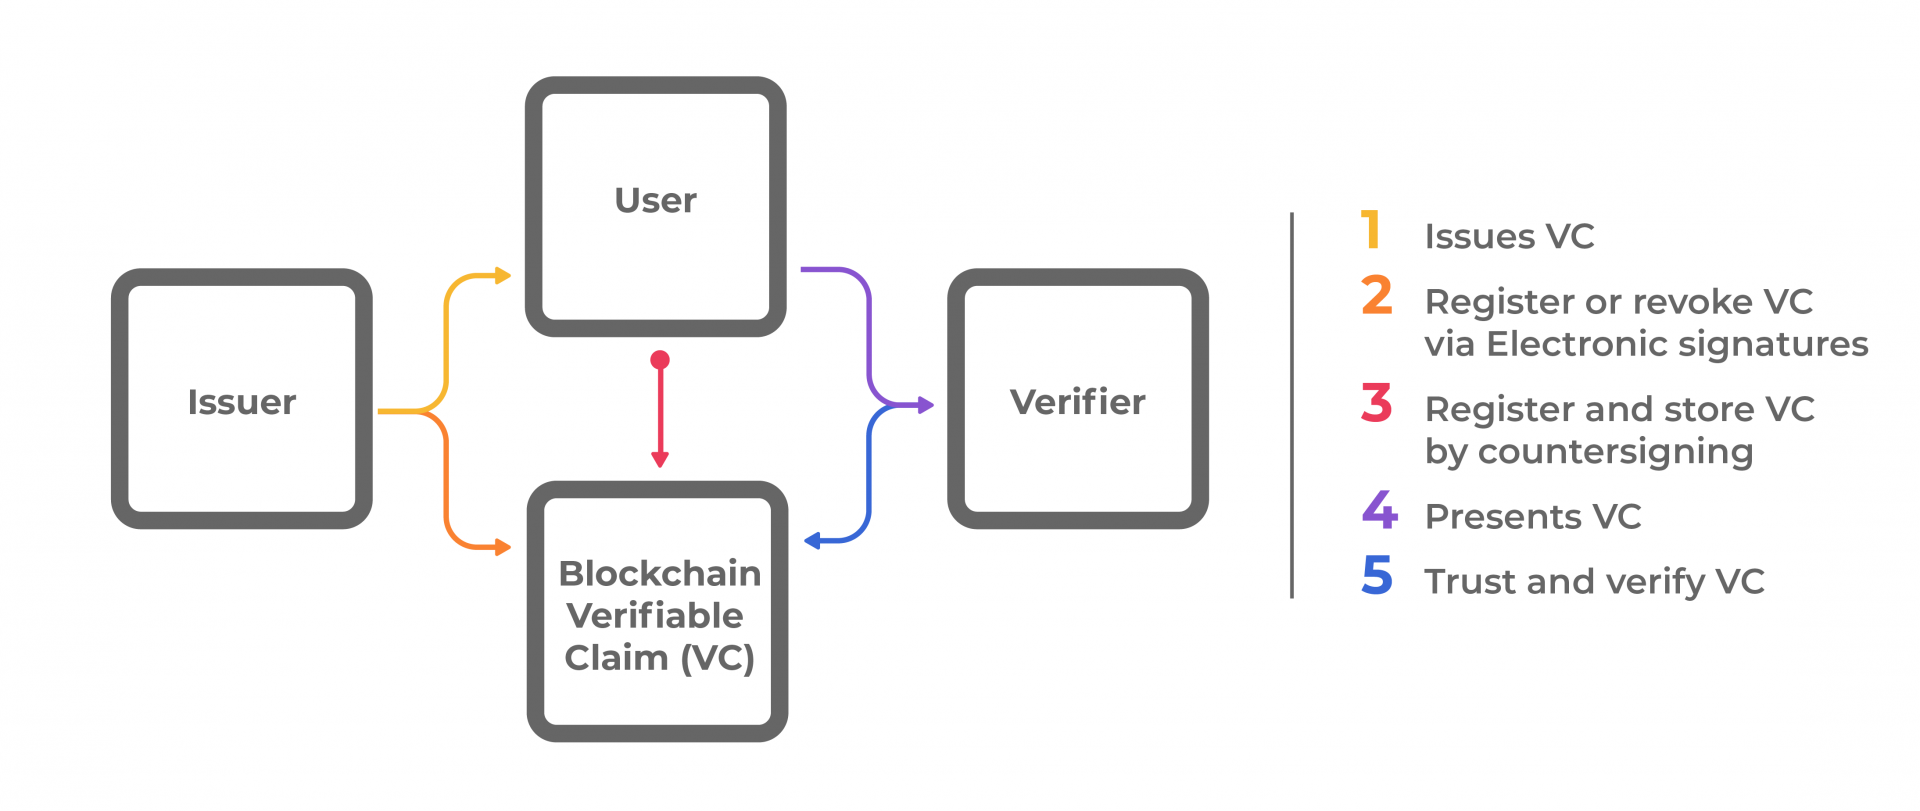 Guiding principles for trusted decentralised digital identity

